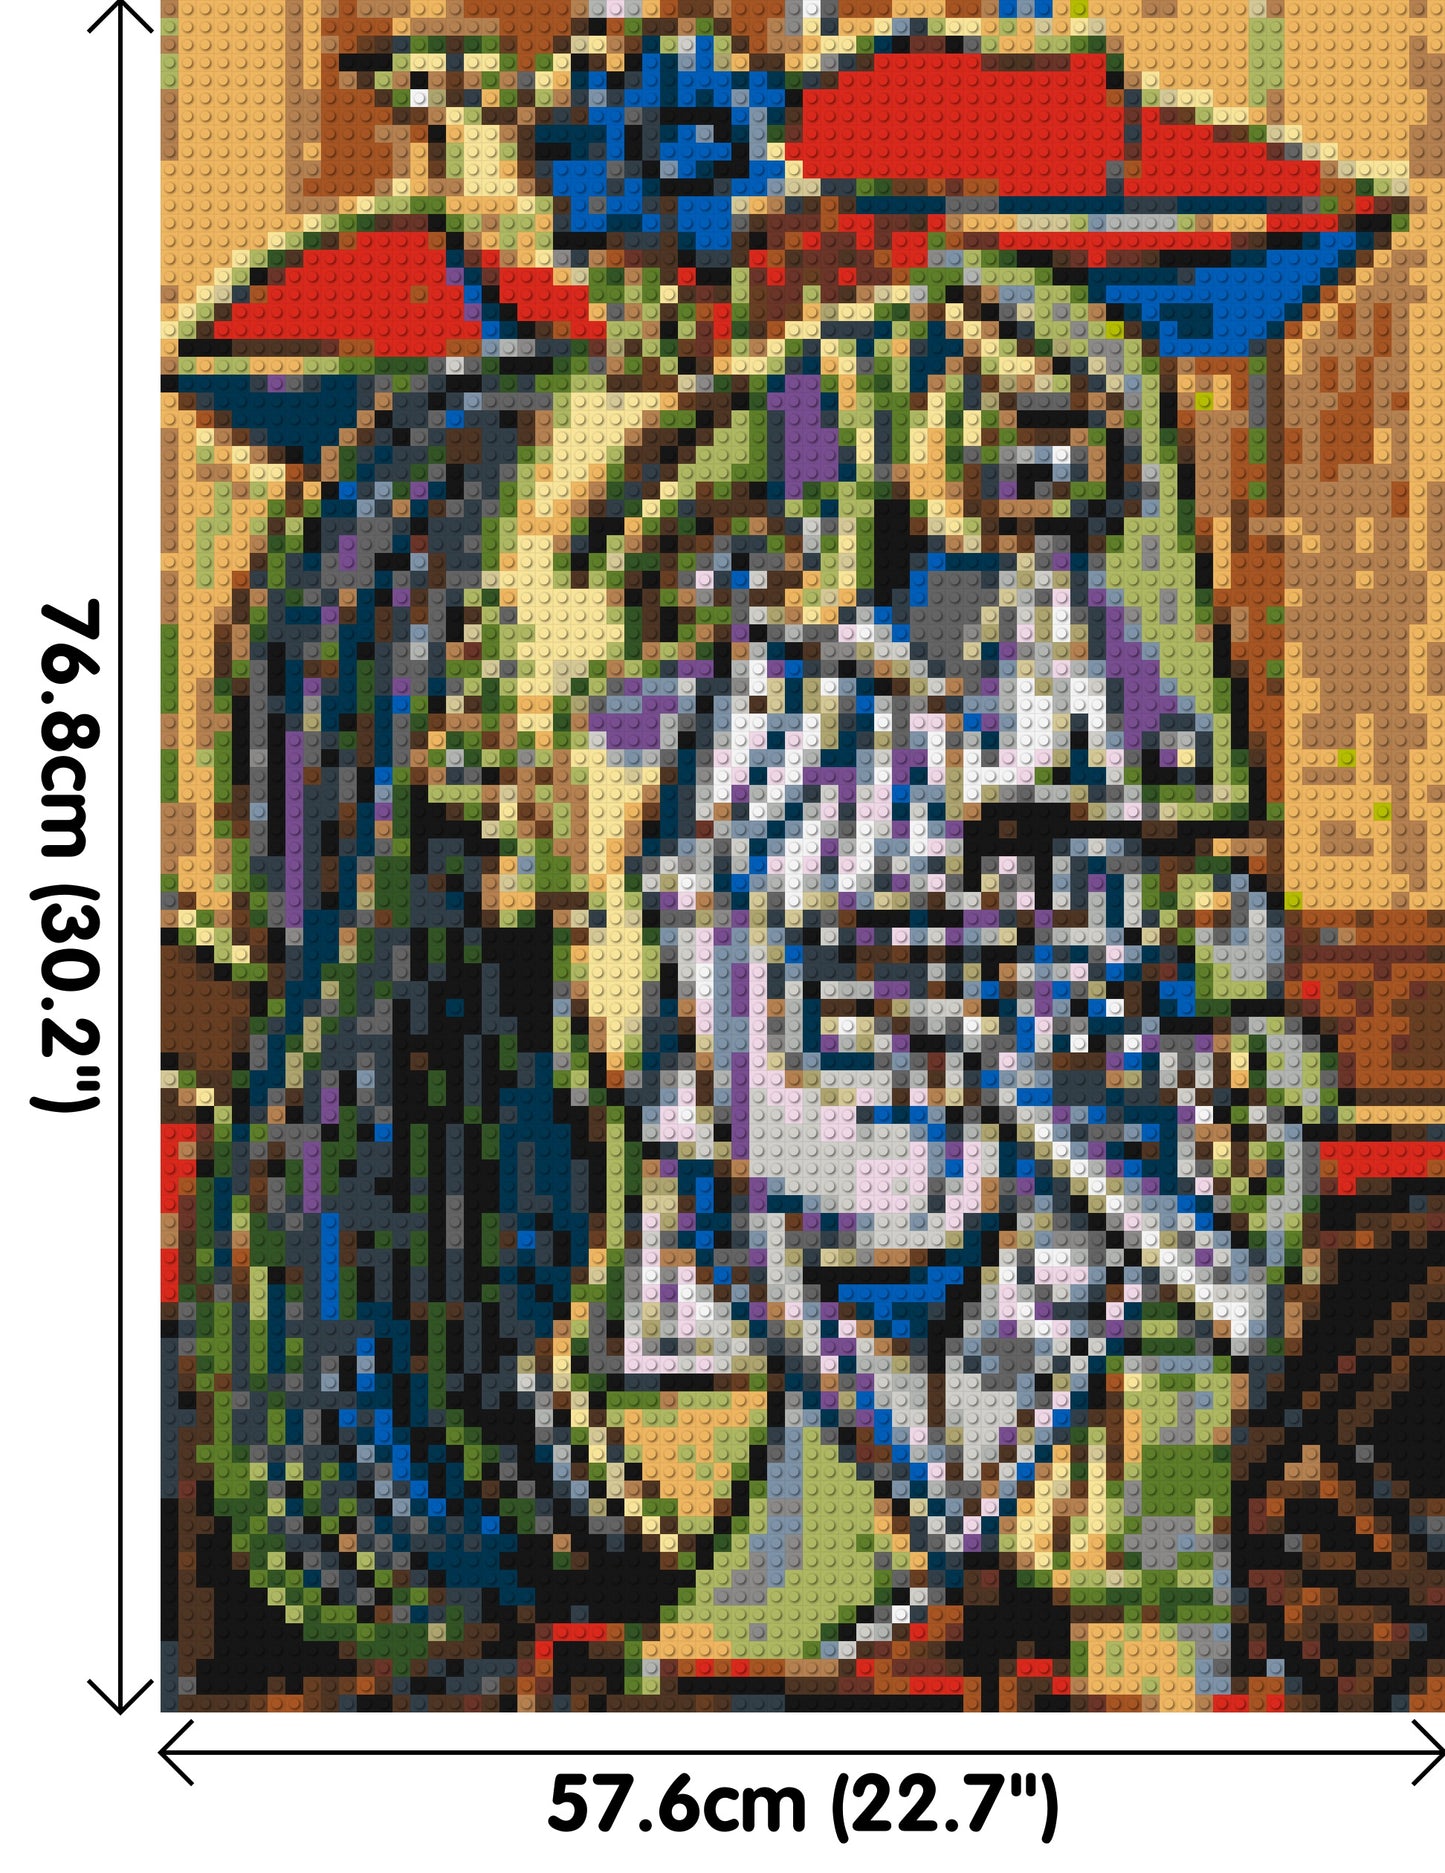 Weeping Woman by Pablo Picasso - Brick Art Mosaic Kit